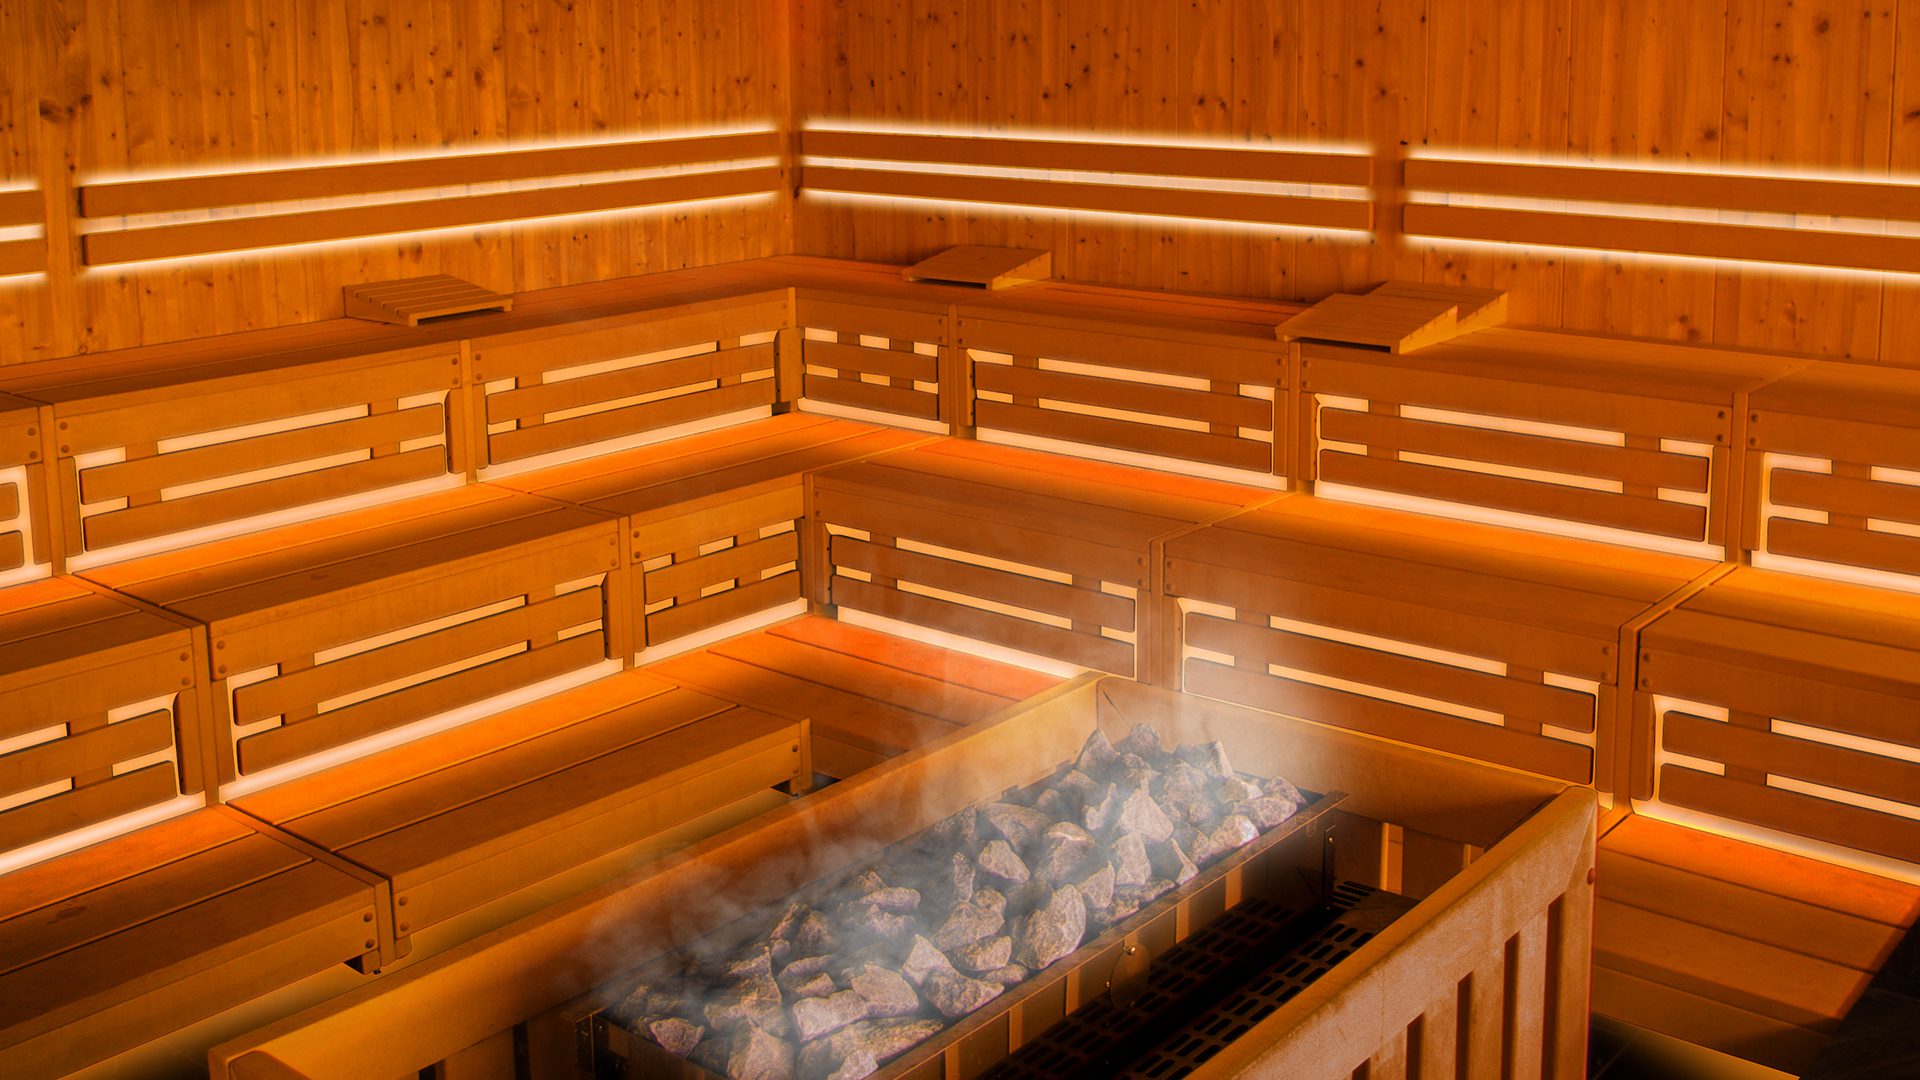 4 Answers to the Most Frequently Asked Questions About Sauna Lighting